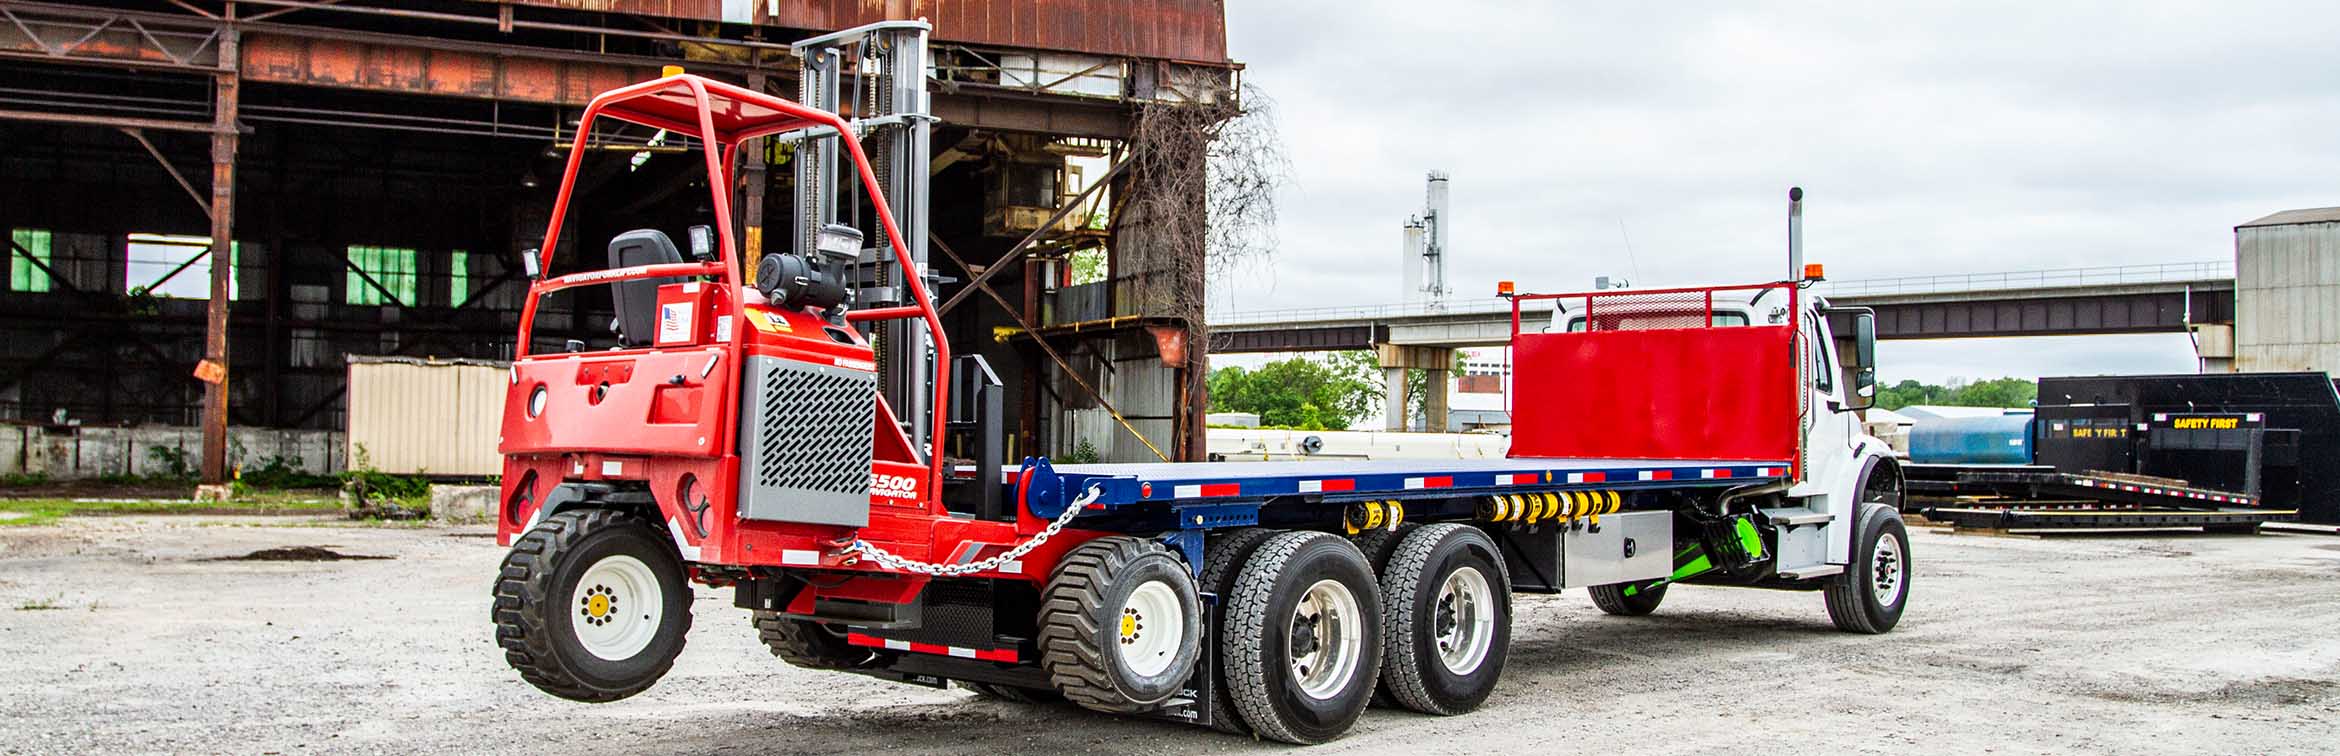 Truck-Mounted Forklifts: The Affordable and Efficient 2-In-1 Machines